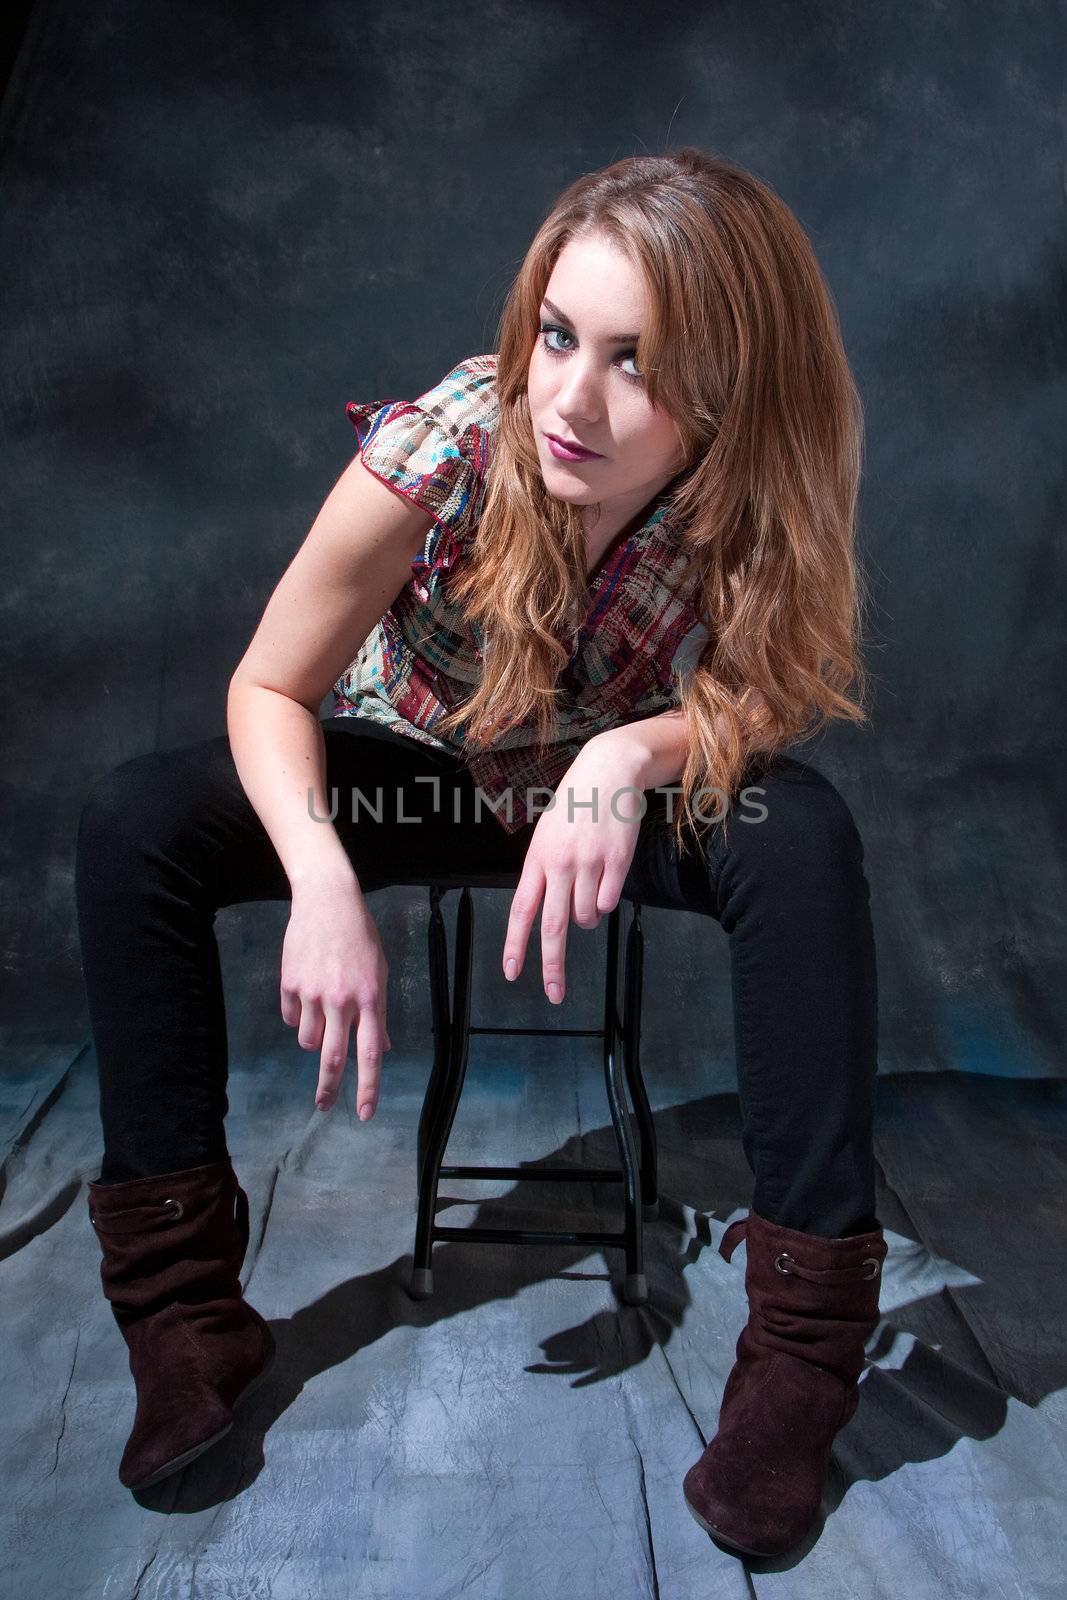 Beautiful dirty-blond girl sitting on stool with attitude